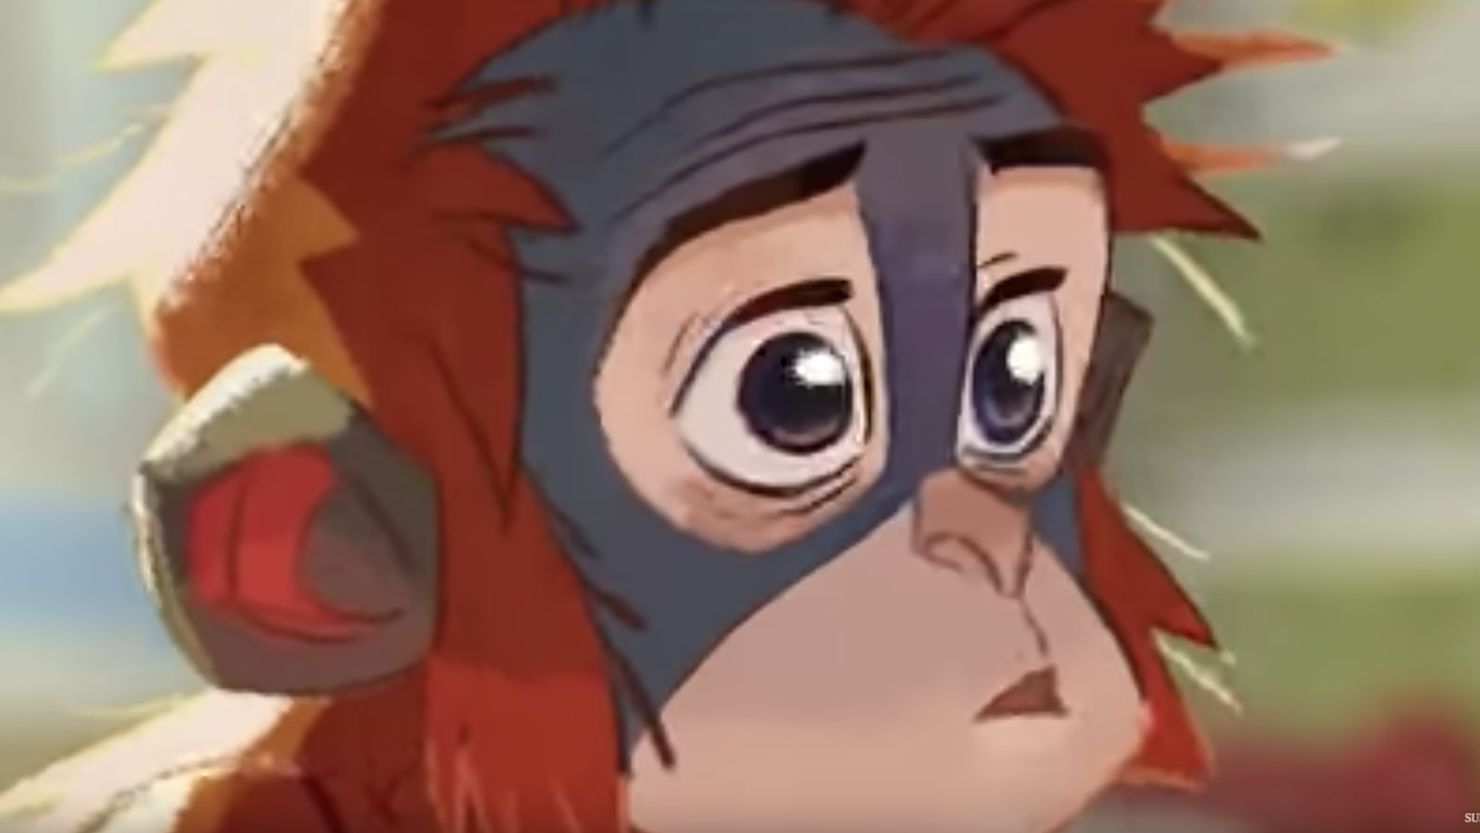 Iceland's banned Christmas commercial features Rang-tan the orangutan.